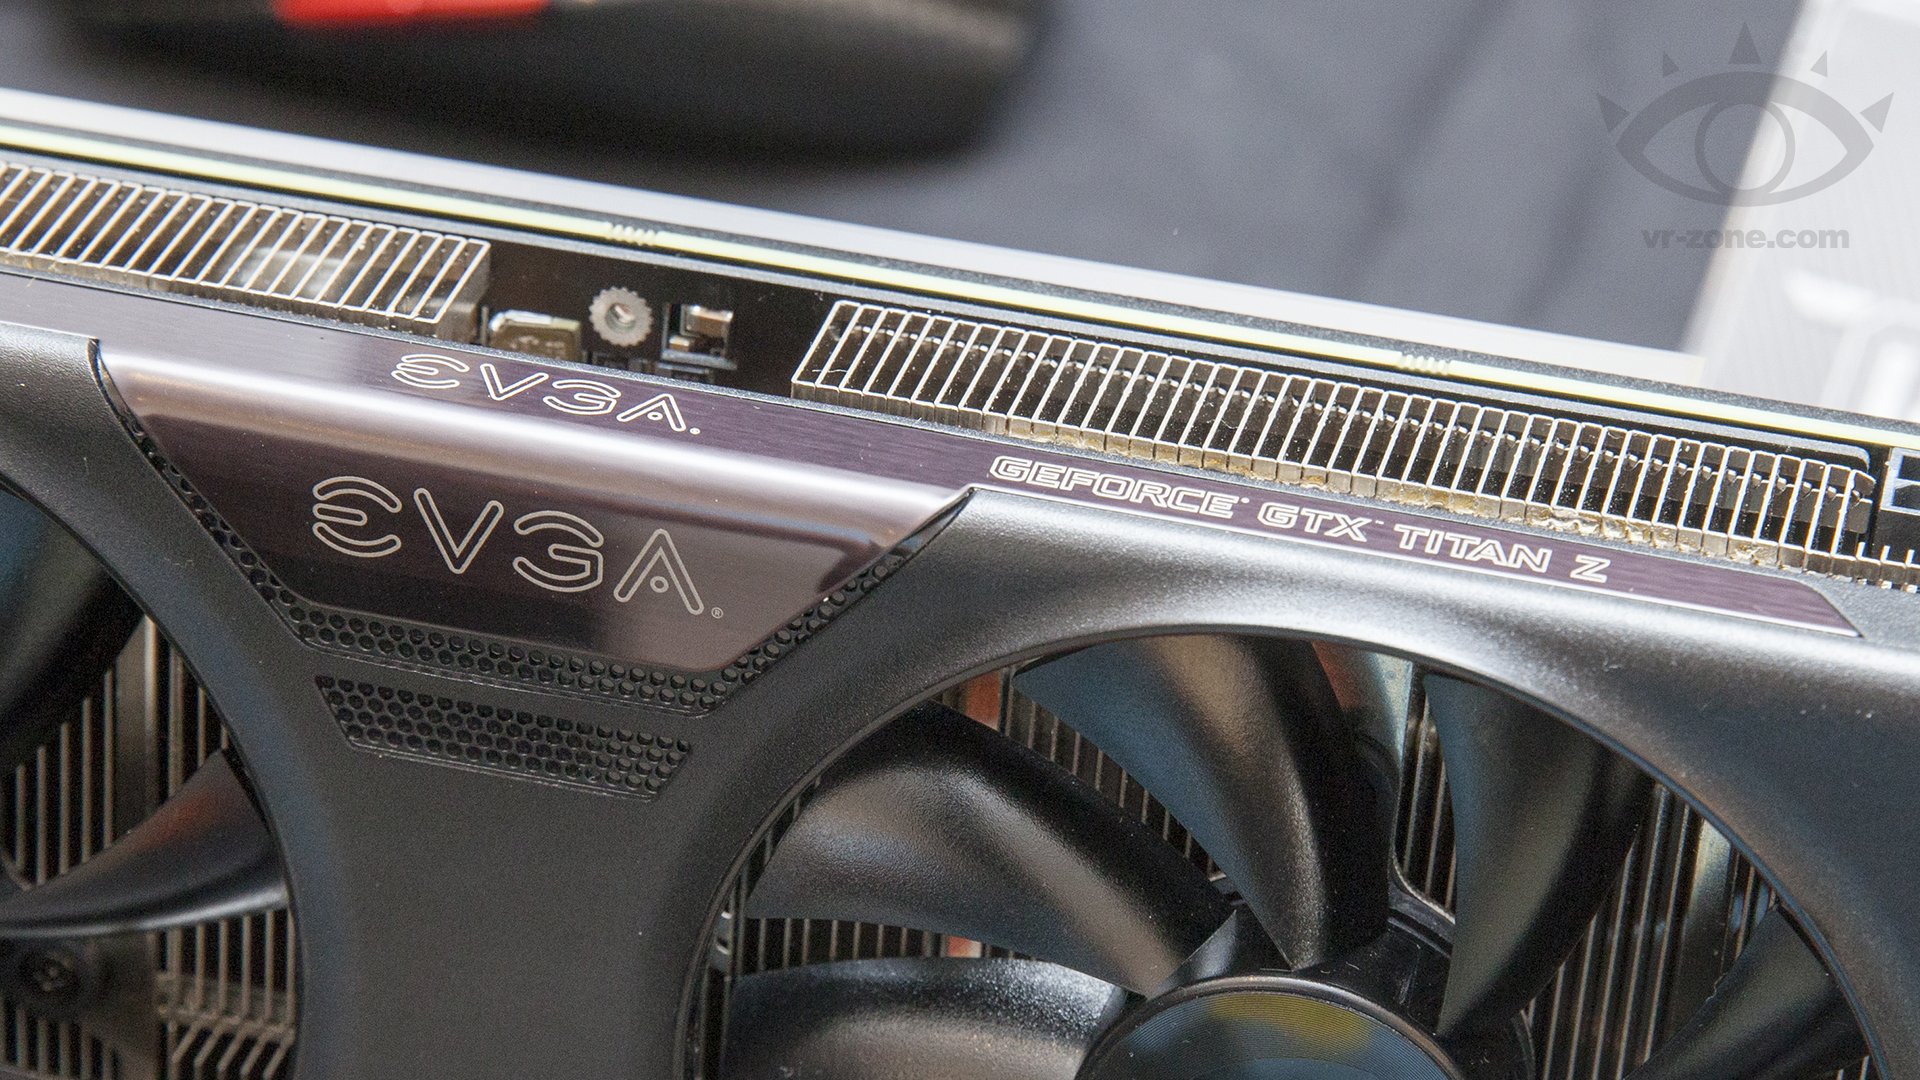 Evga Geforce Gtx Titan Z With Acx Cooler Spotted At Computex Images, Photos, Reviews